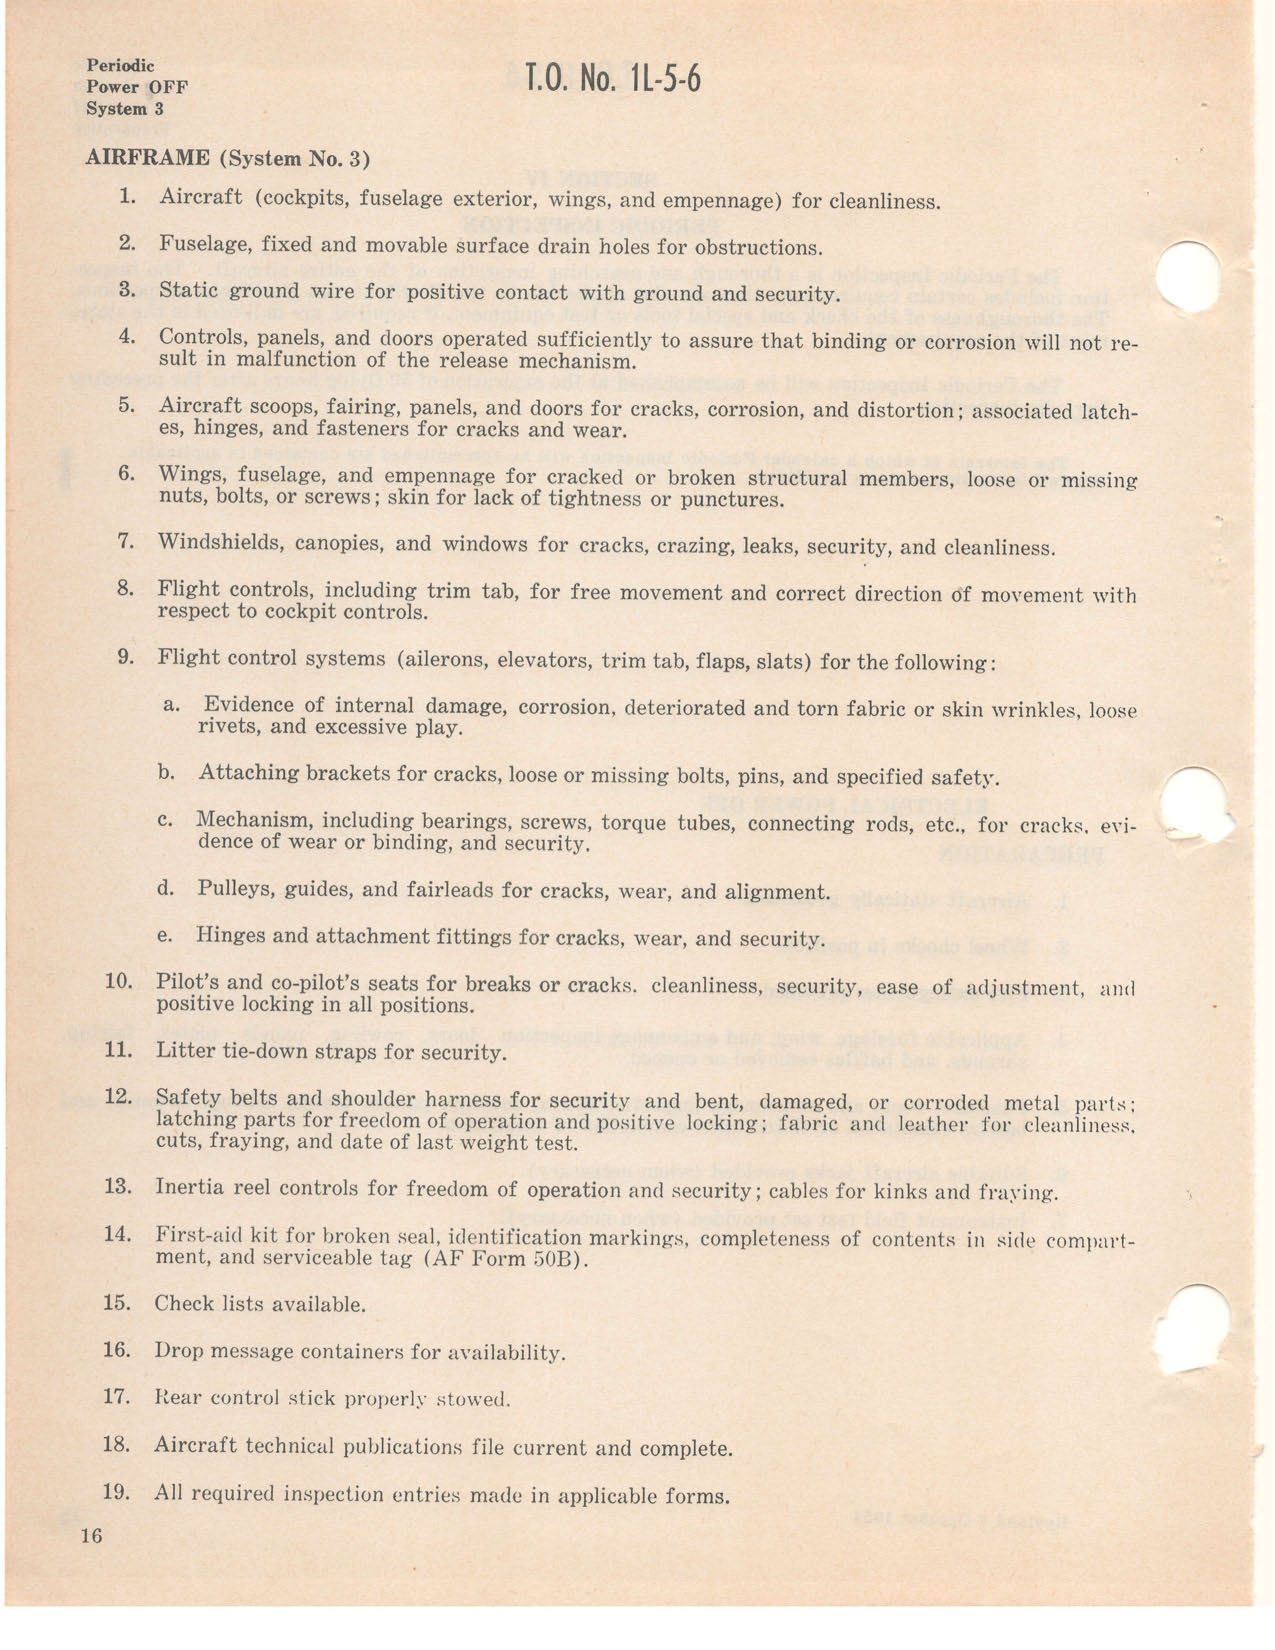 Sample page 20 from AirCorps Library document: Inspection Requirements - L-5, OY-1, OY-2